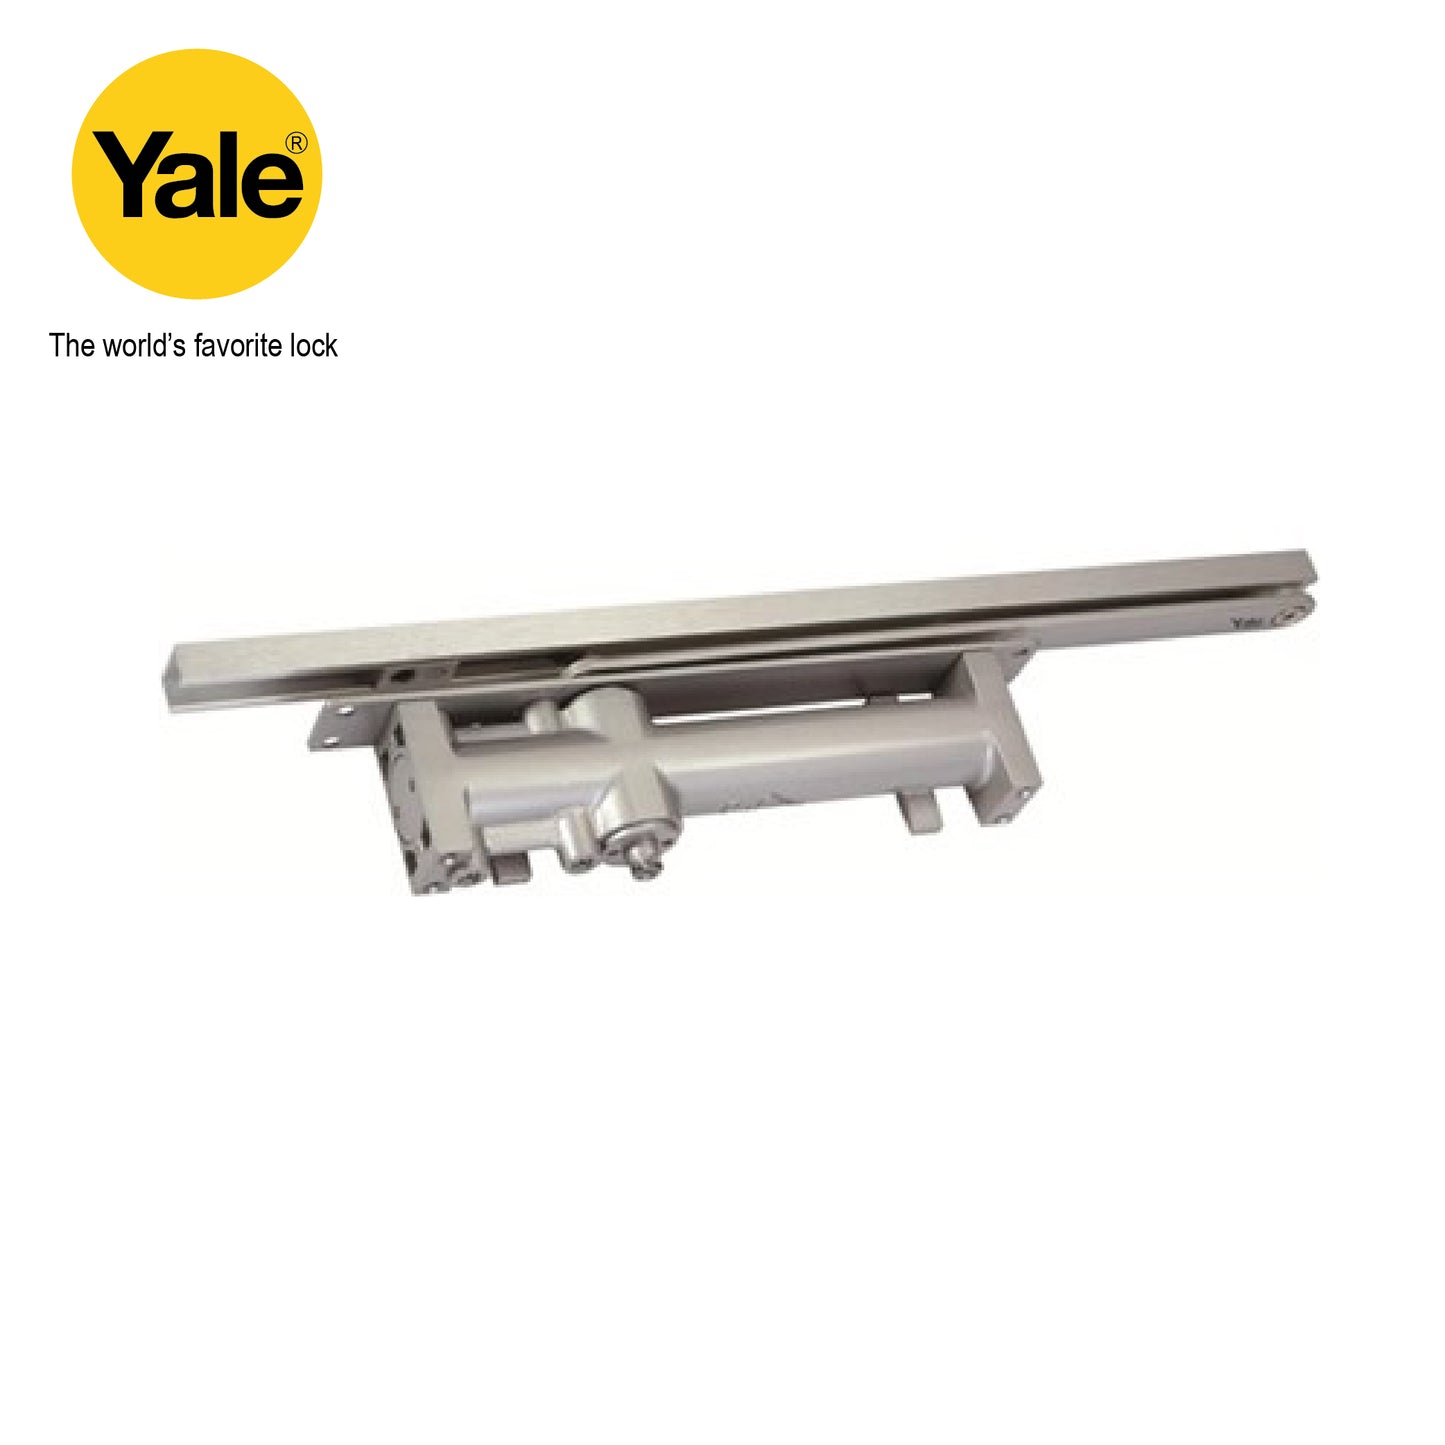 Yale Hold Open Door Closer - YDCR8003H